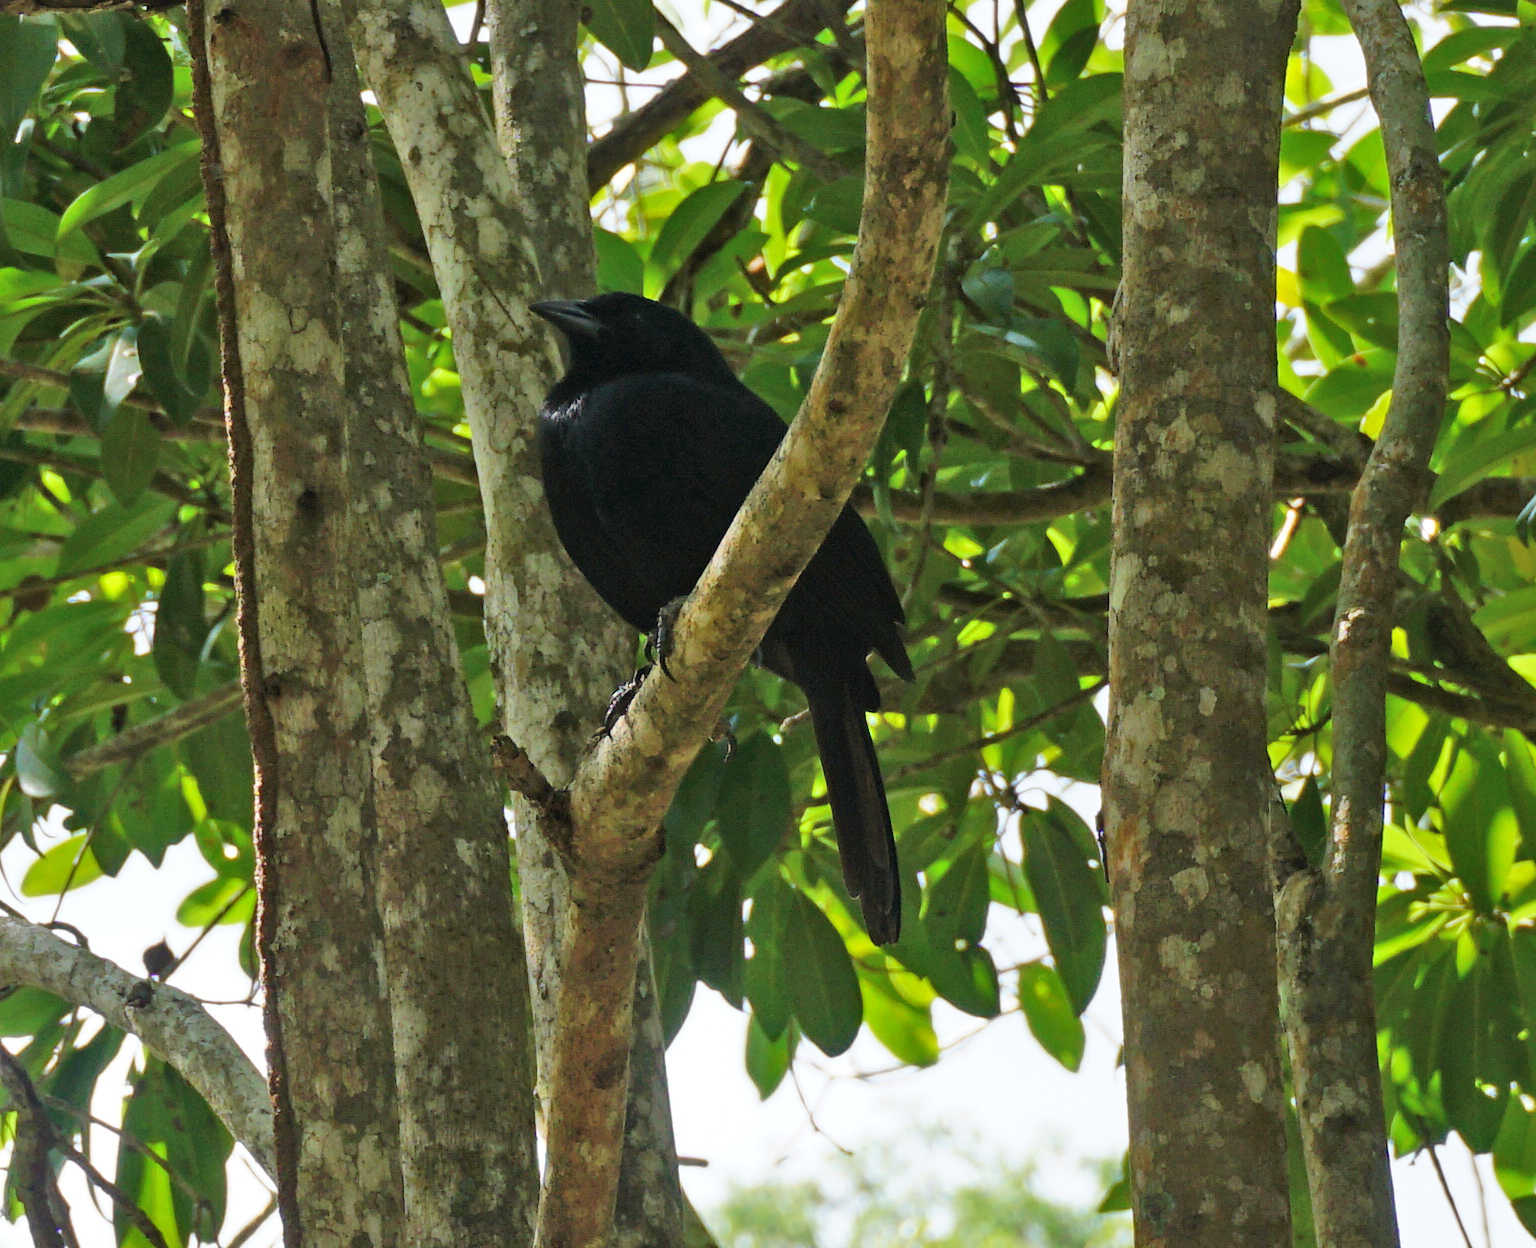 Image of Melodious Blackbird